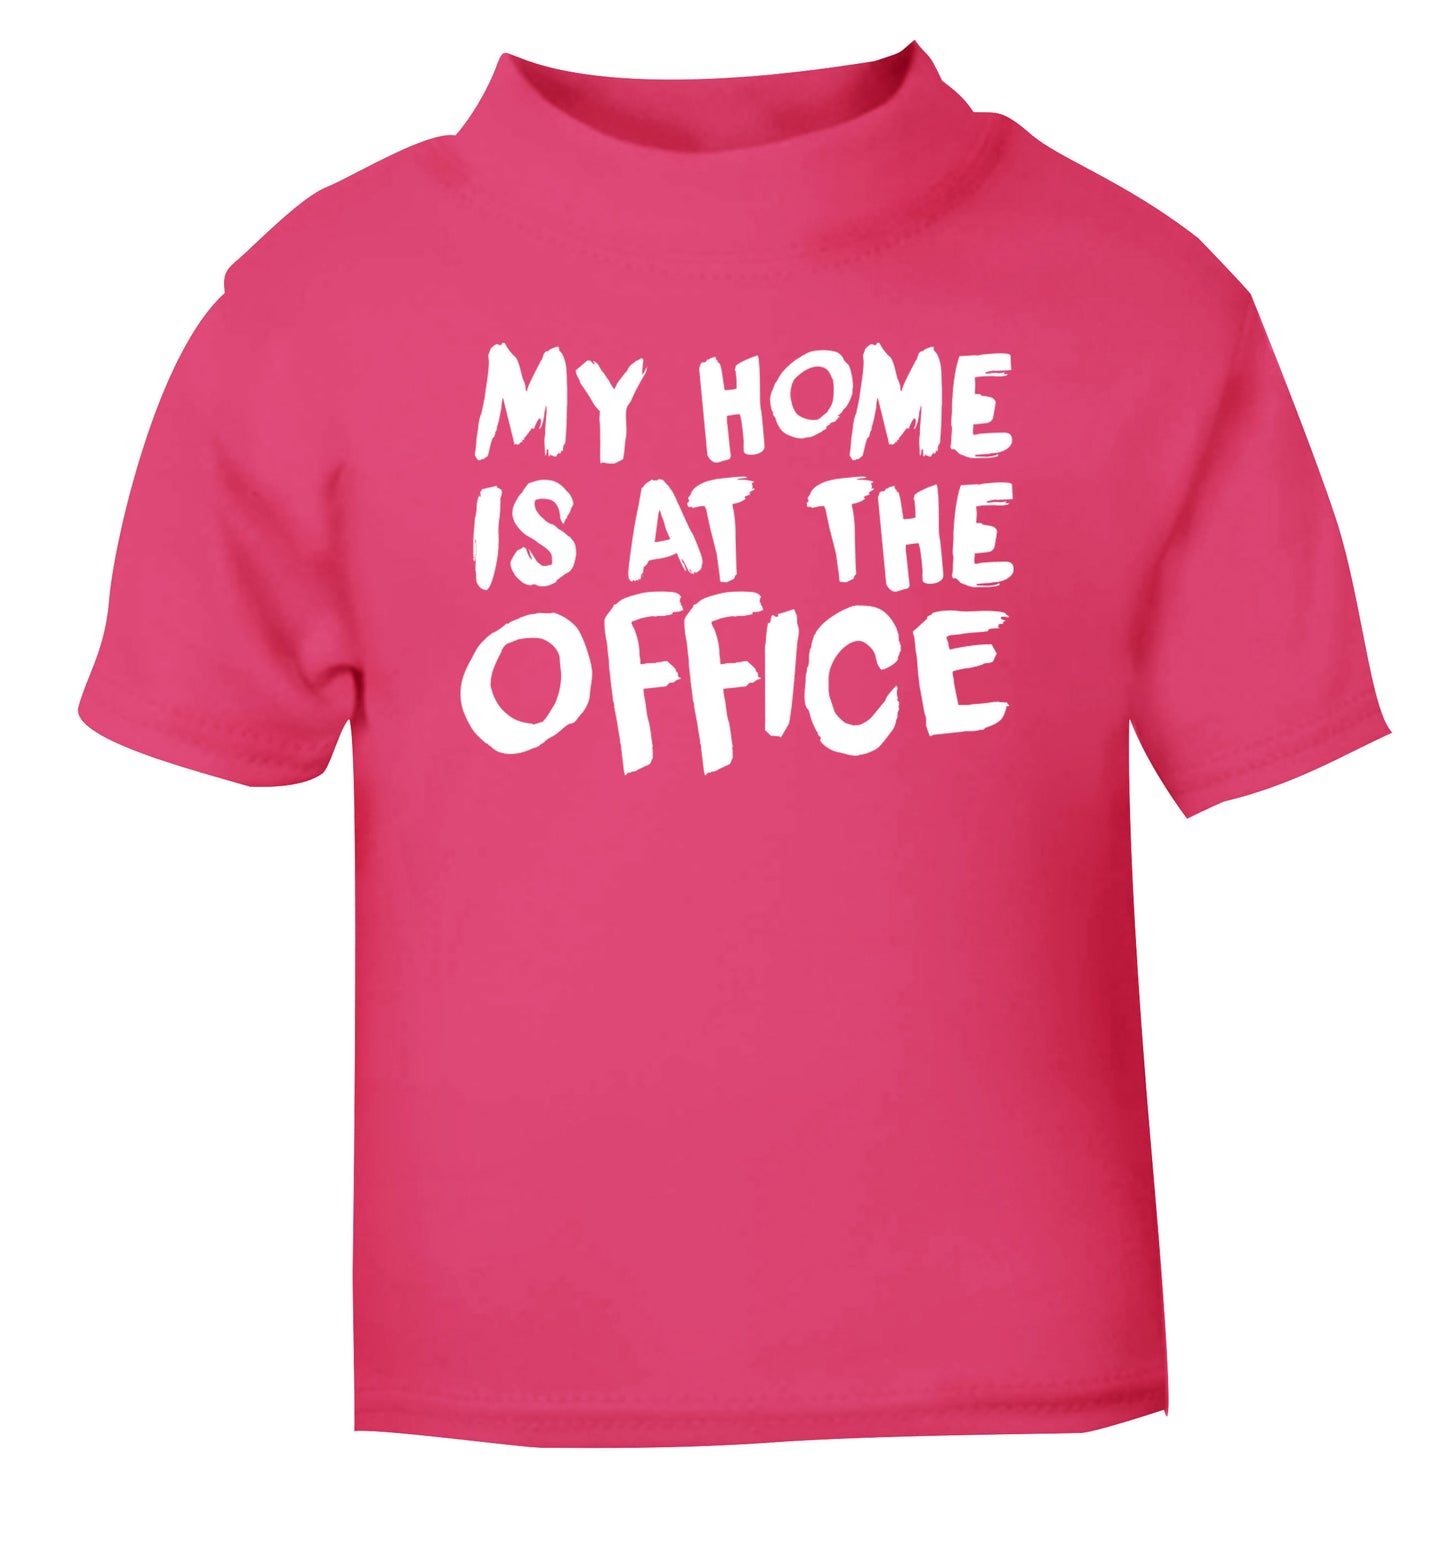 My home is at the office pink Baby Toddler Tshirt 2 Years